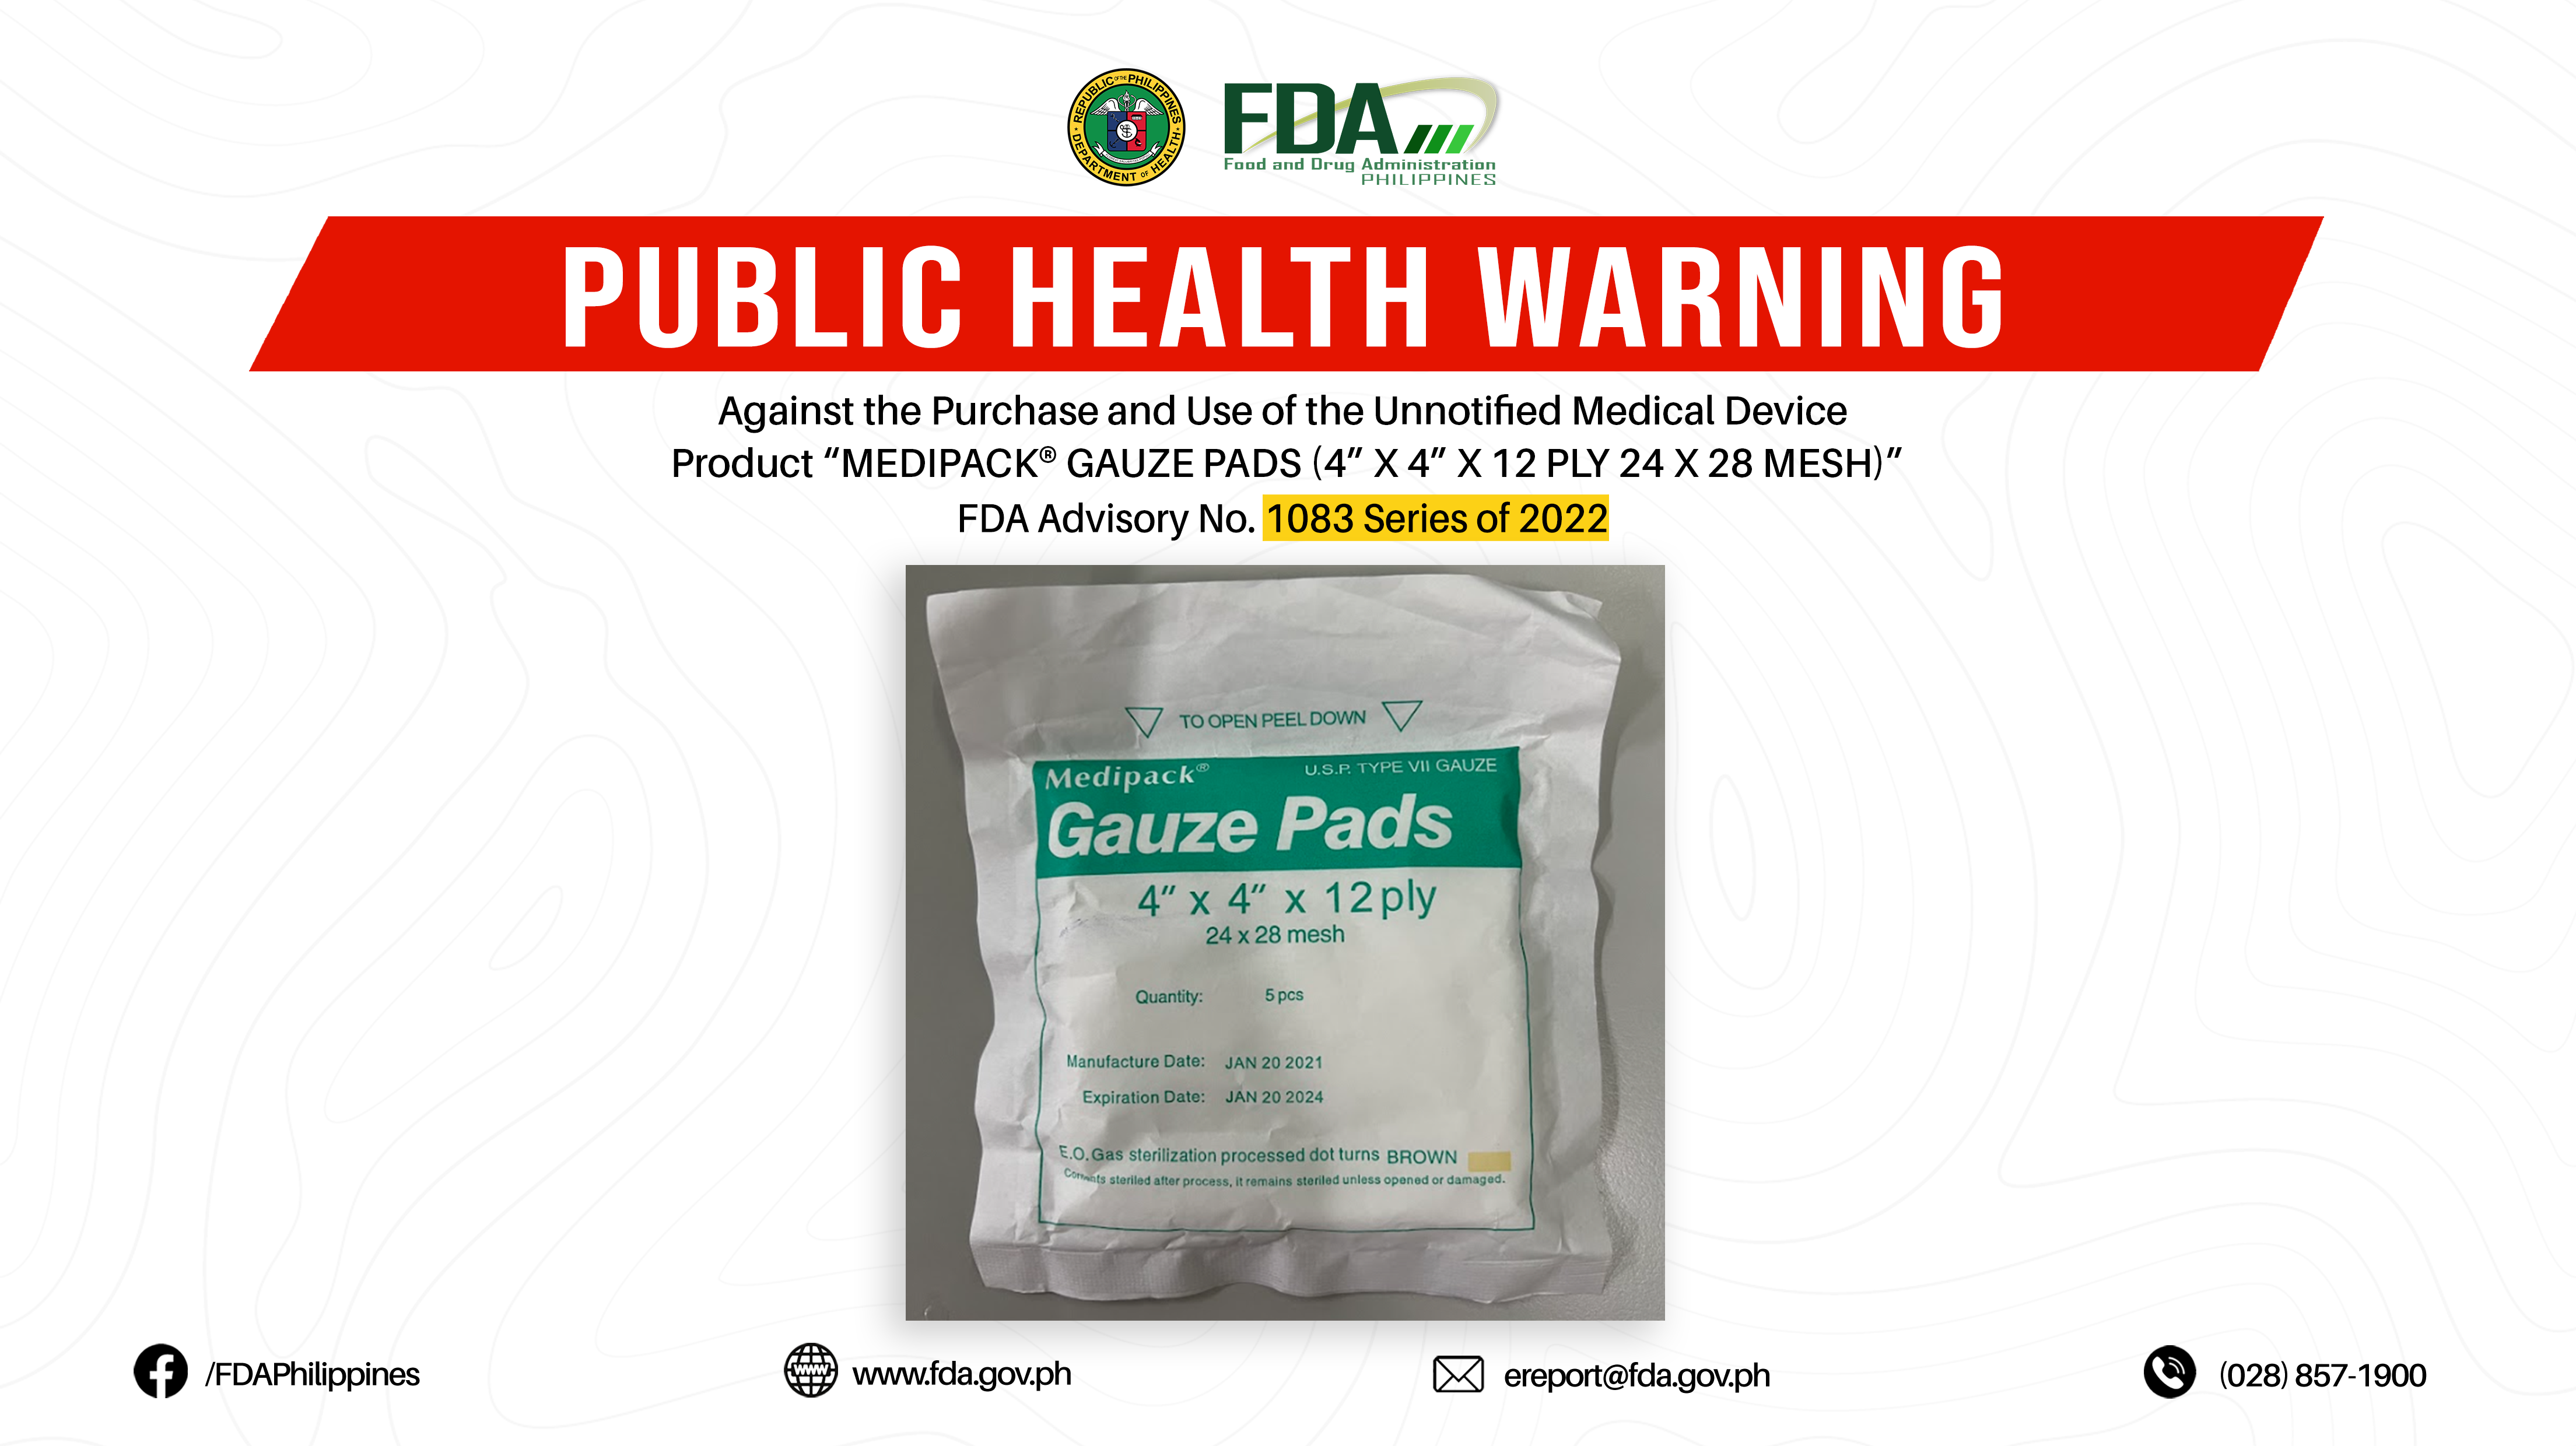 FDA Advisory No.2022-1083 || Public Health Warning Against the Purchase and Use of the Unnotified Medical Device Product “MEDIPACK® GAUZE PADS (4” X 4” X 12 PLY 24 X 28 MESH)”